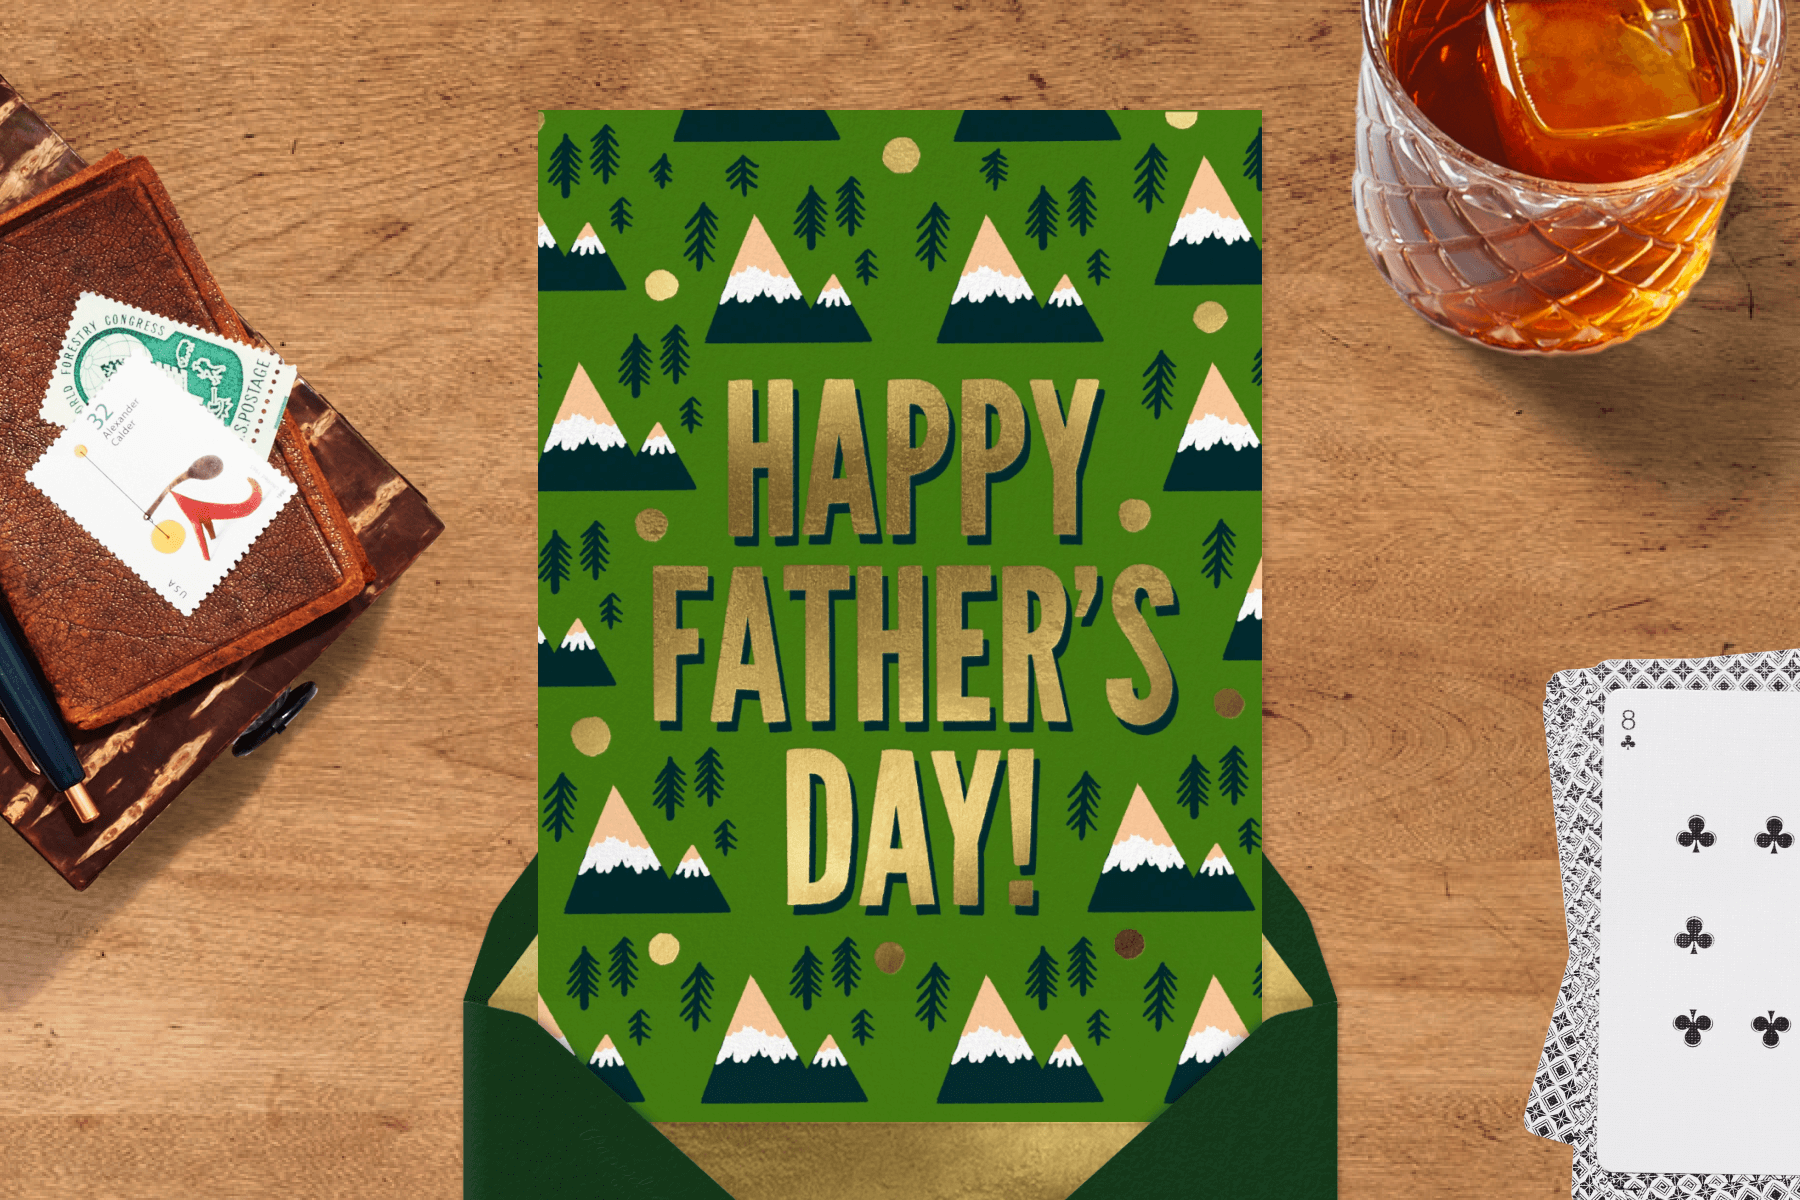 A green card reads HAPPY FATHER’S DAY! in gold letters surrounded by simple mountains and trees, on a wooden backdrop with stamps, an adult beverage, and playing cards.